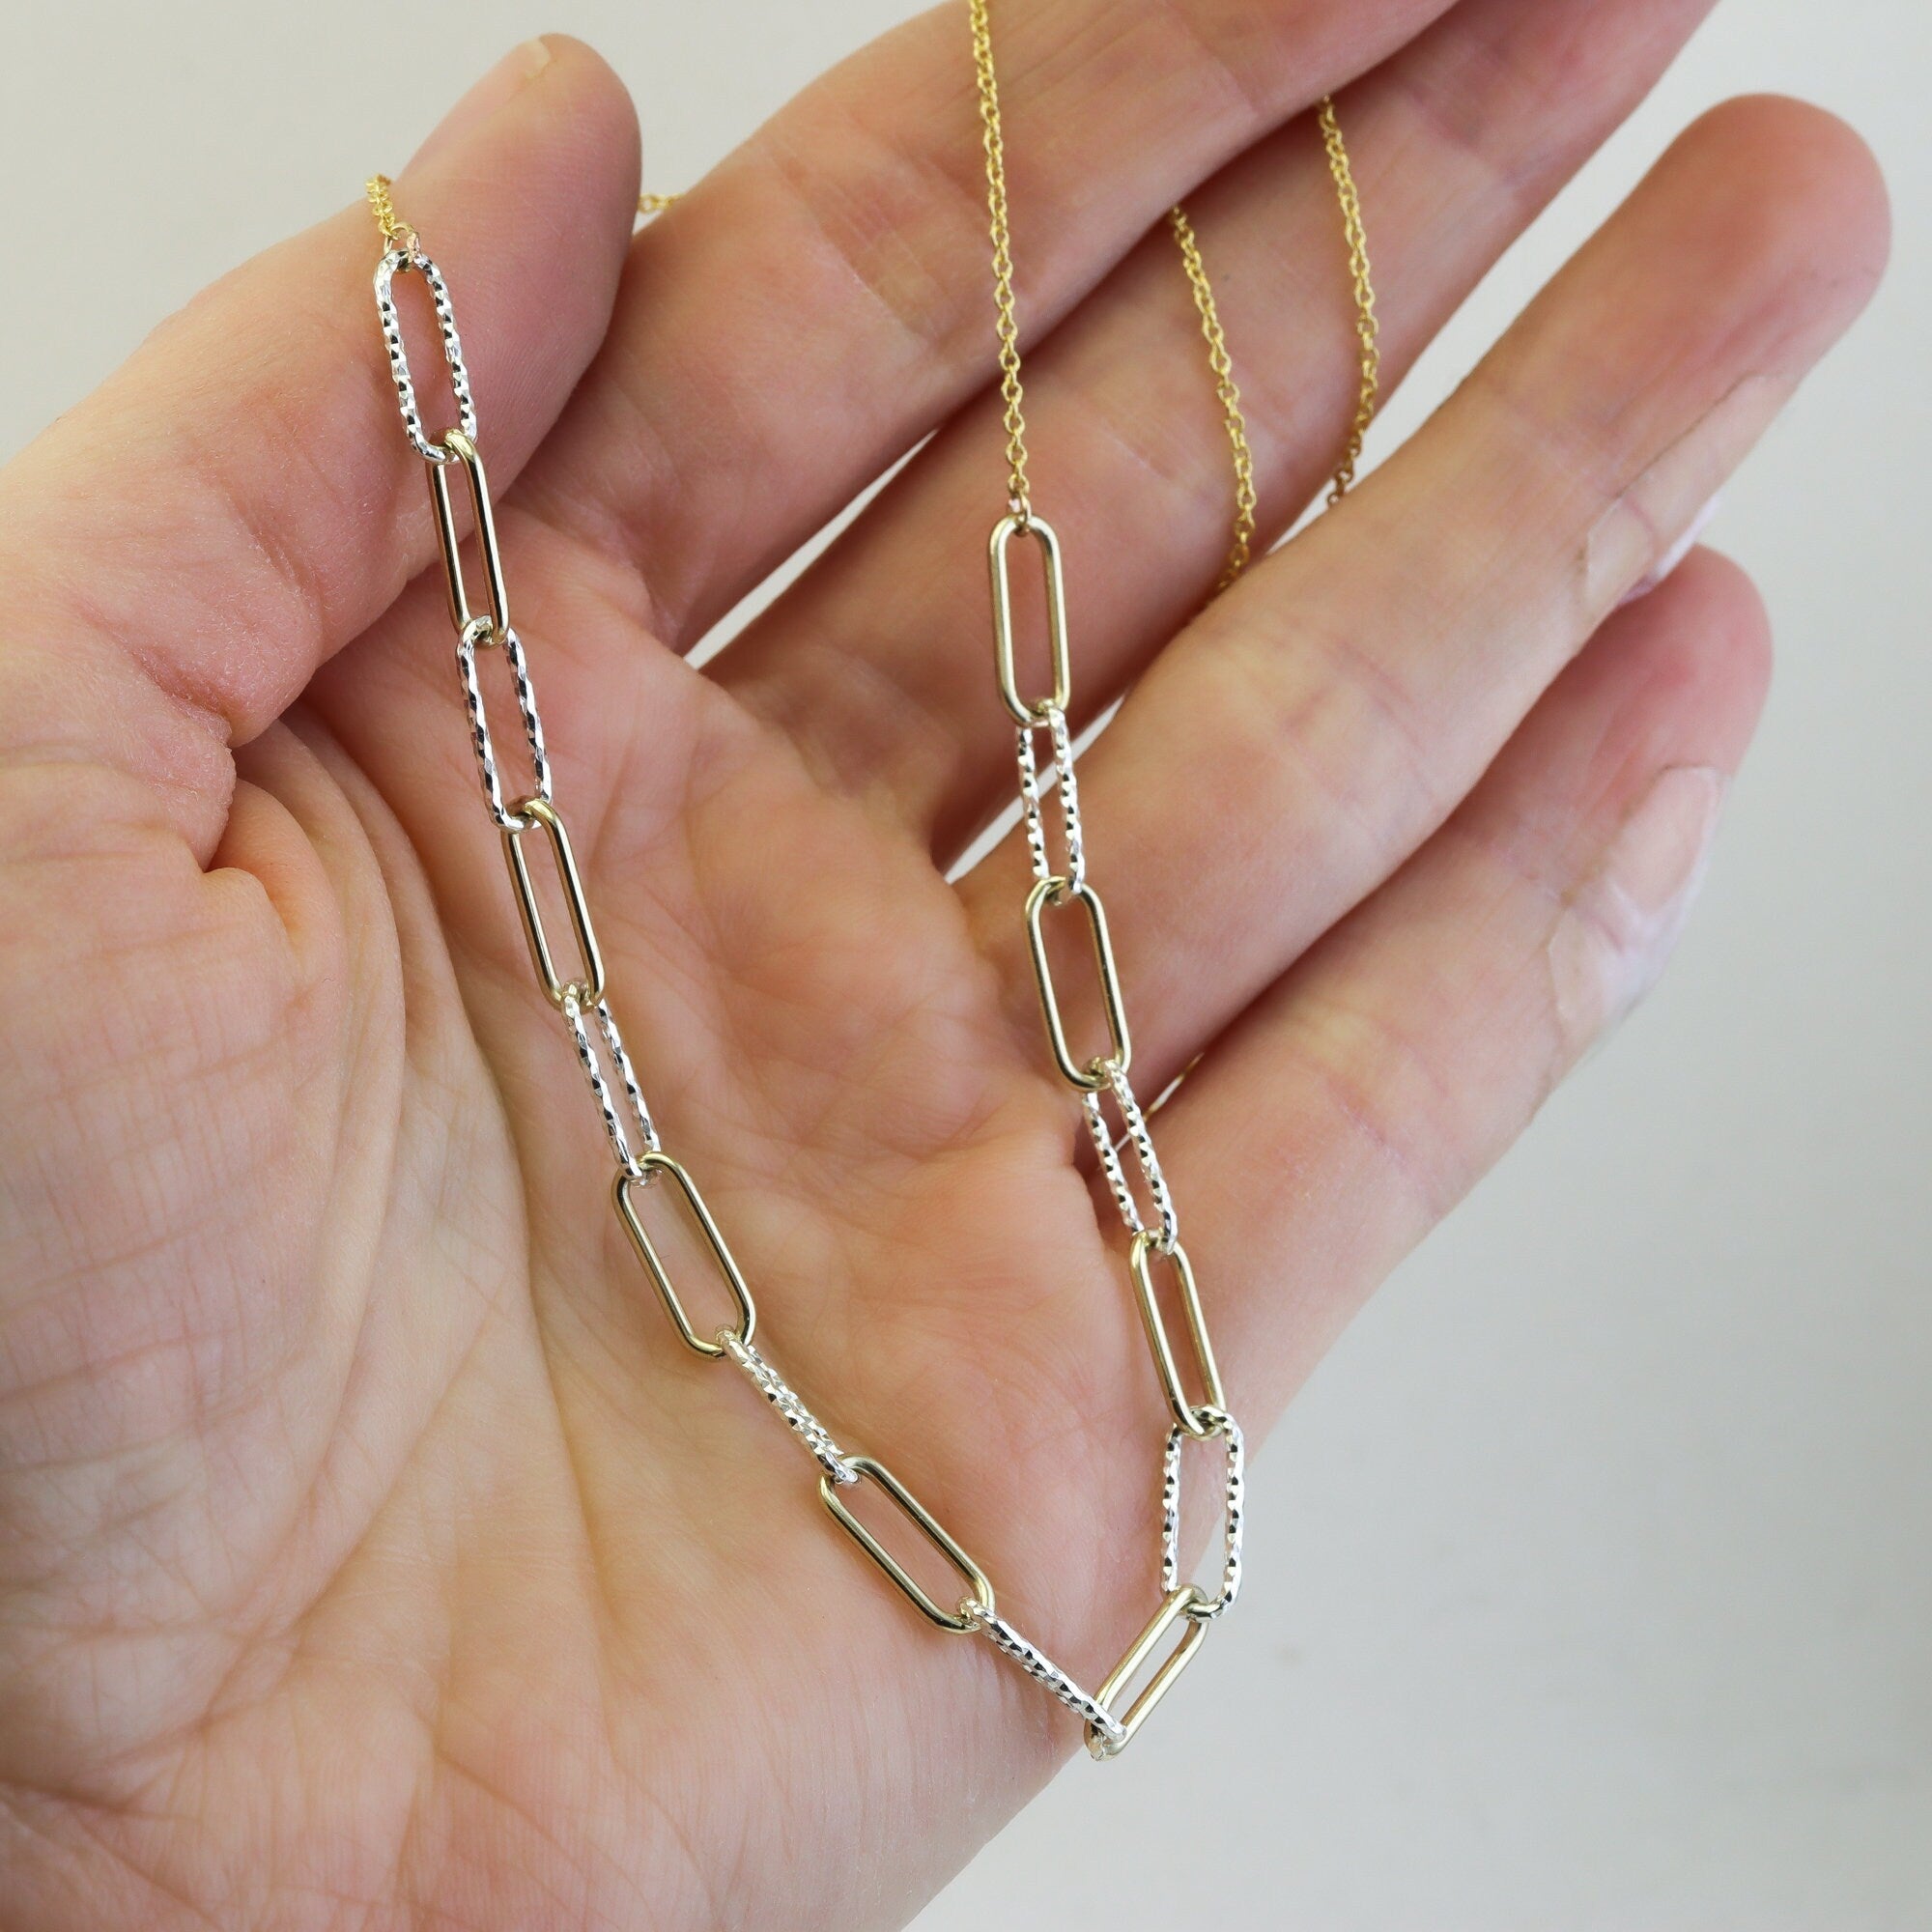 Buy Chunky Paperclip Necklace, Long Rectangle Link Chain, Gift for Her,  Paperclip Jewelry, Layering Necklace, 14k Gold Fill Choker, Minimalist  Online in India - Etsy